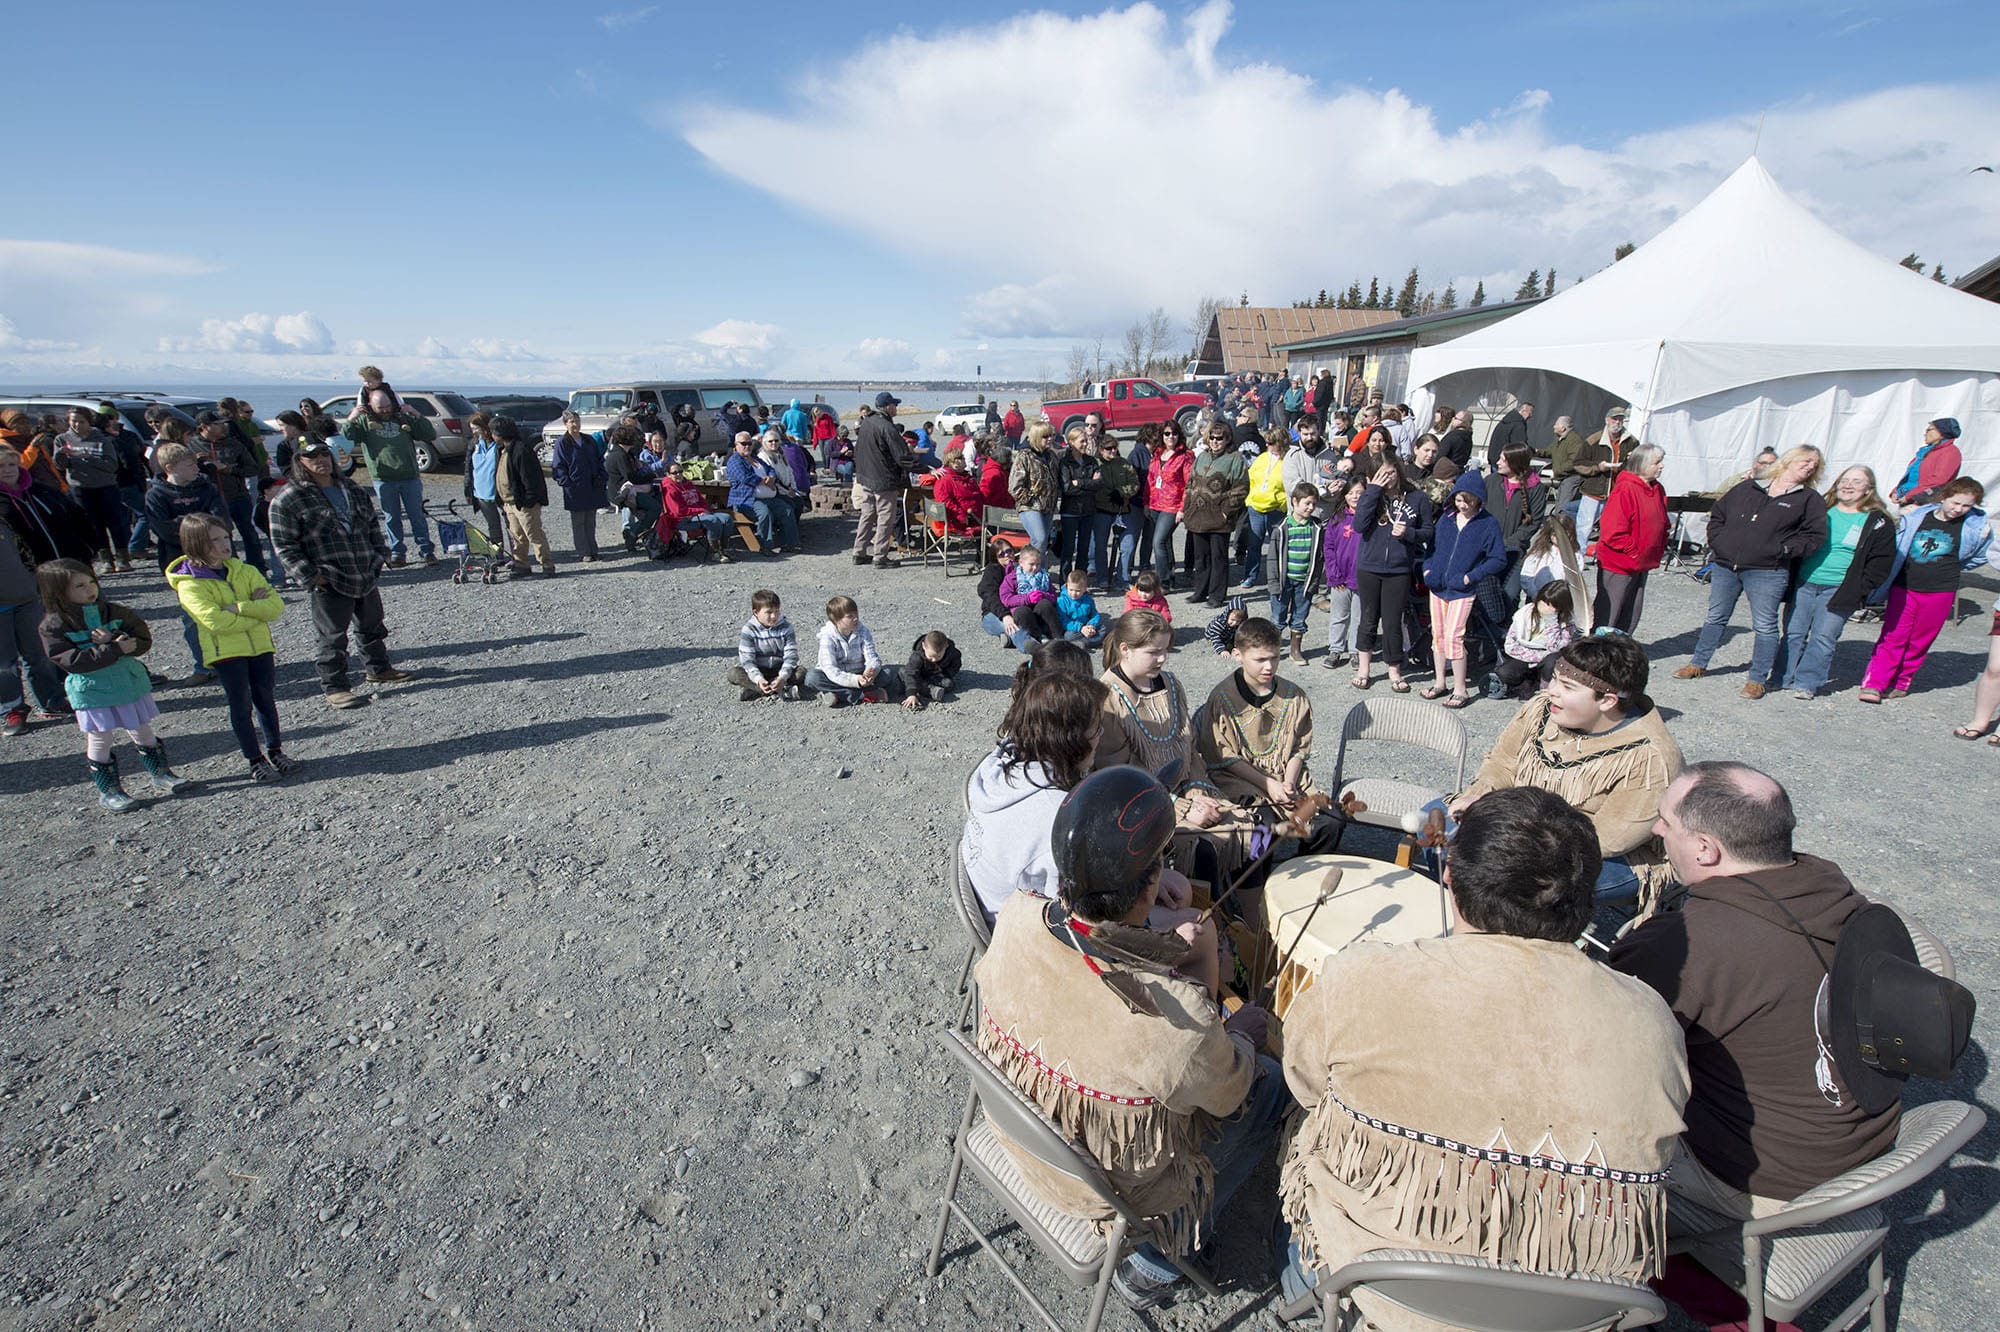 The Jabila’ina Dancers perform at the opening day of the tribe’s educational fishery on May 1, 2014.